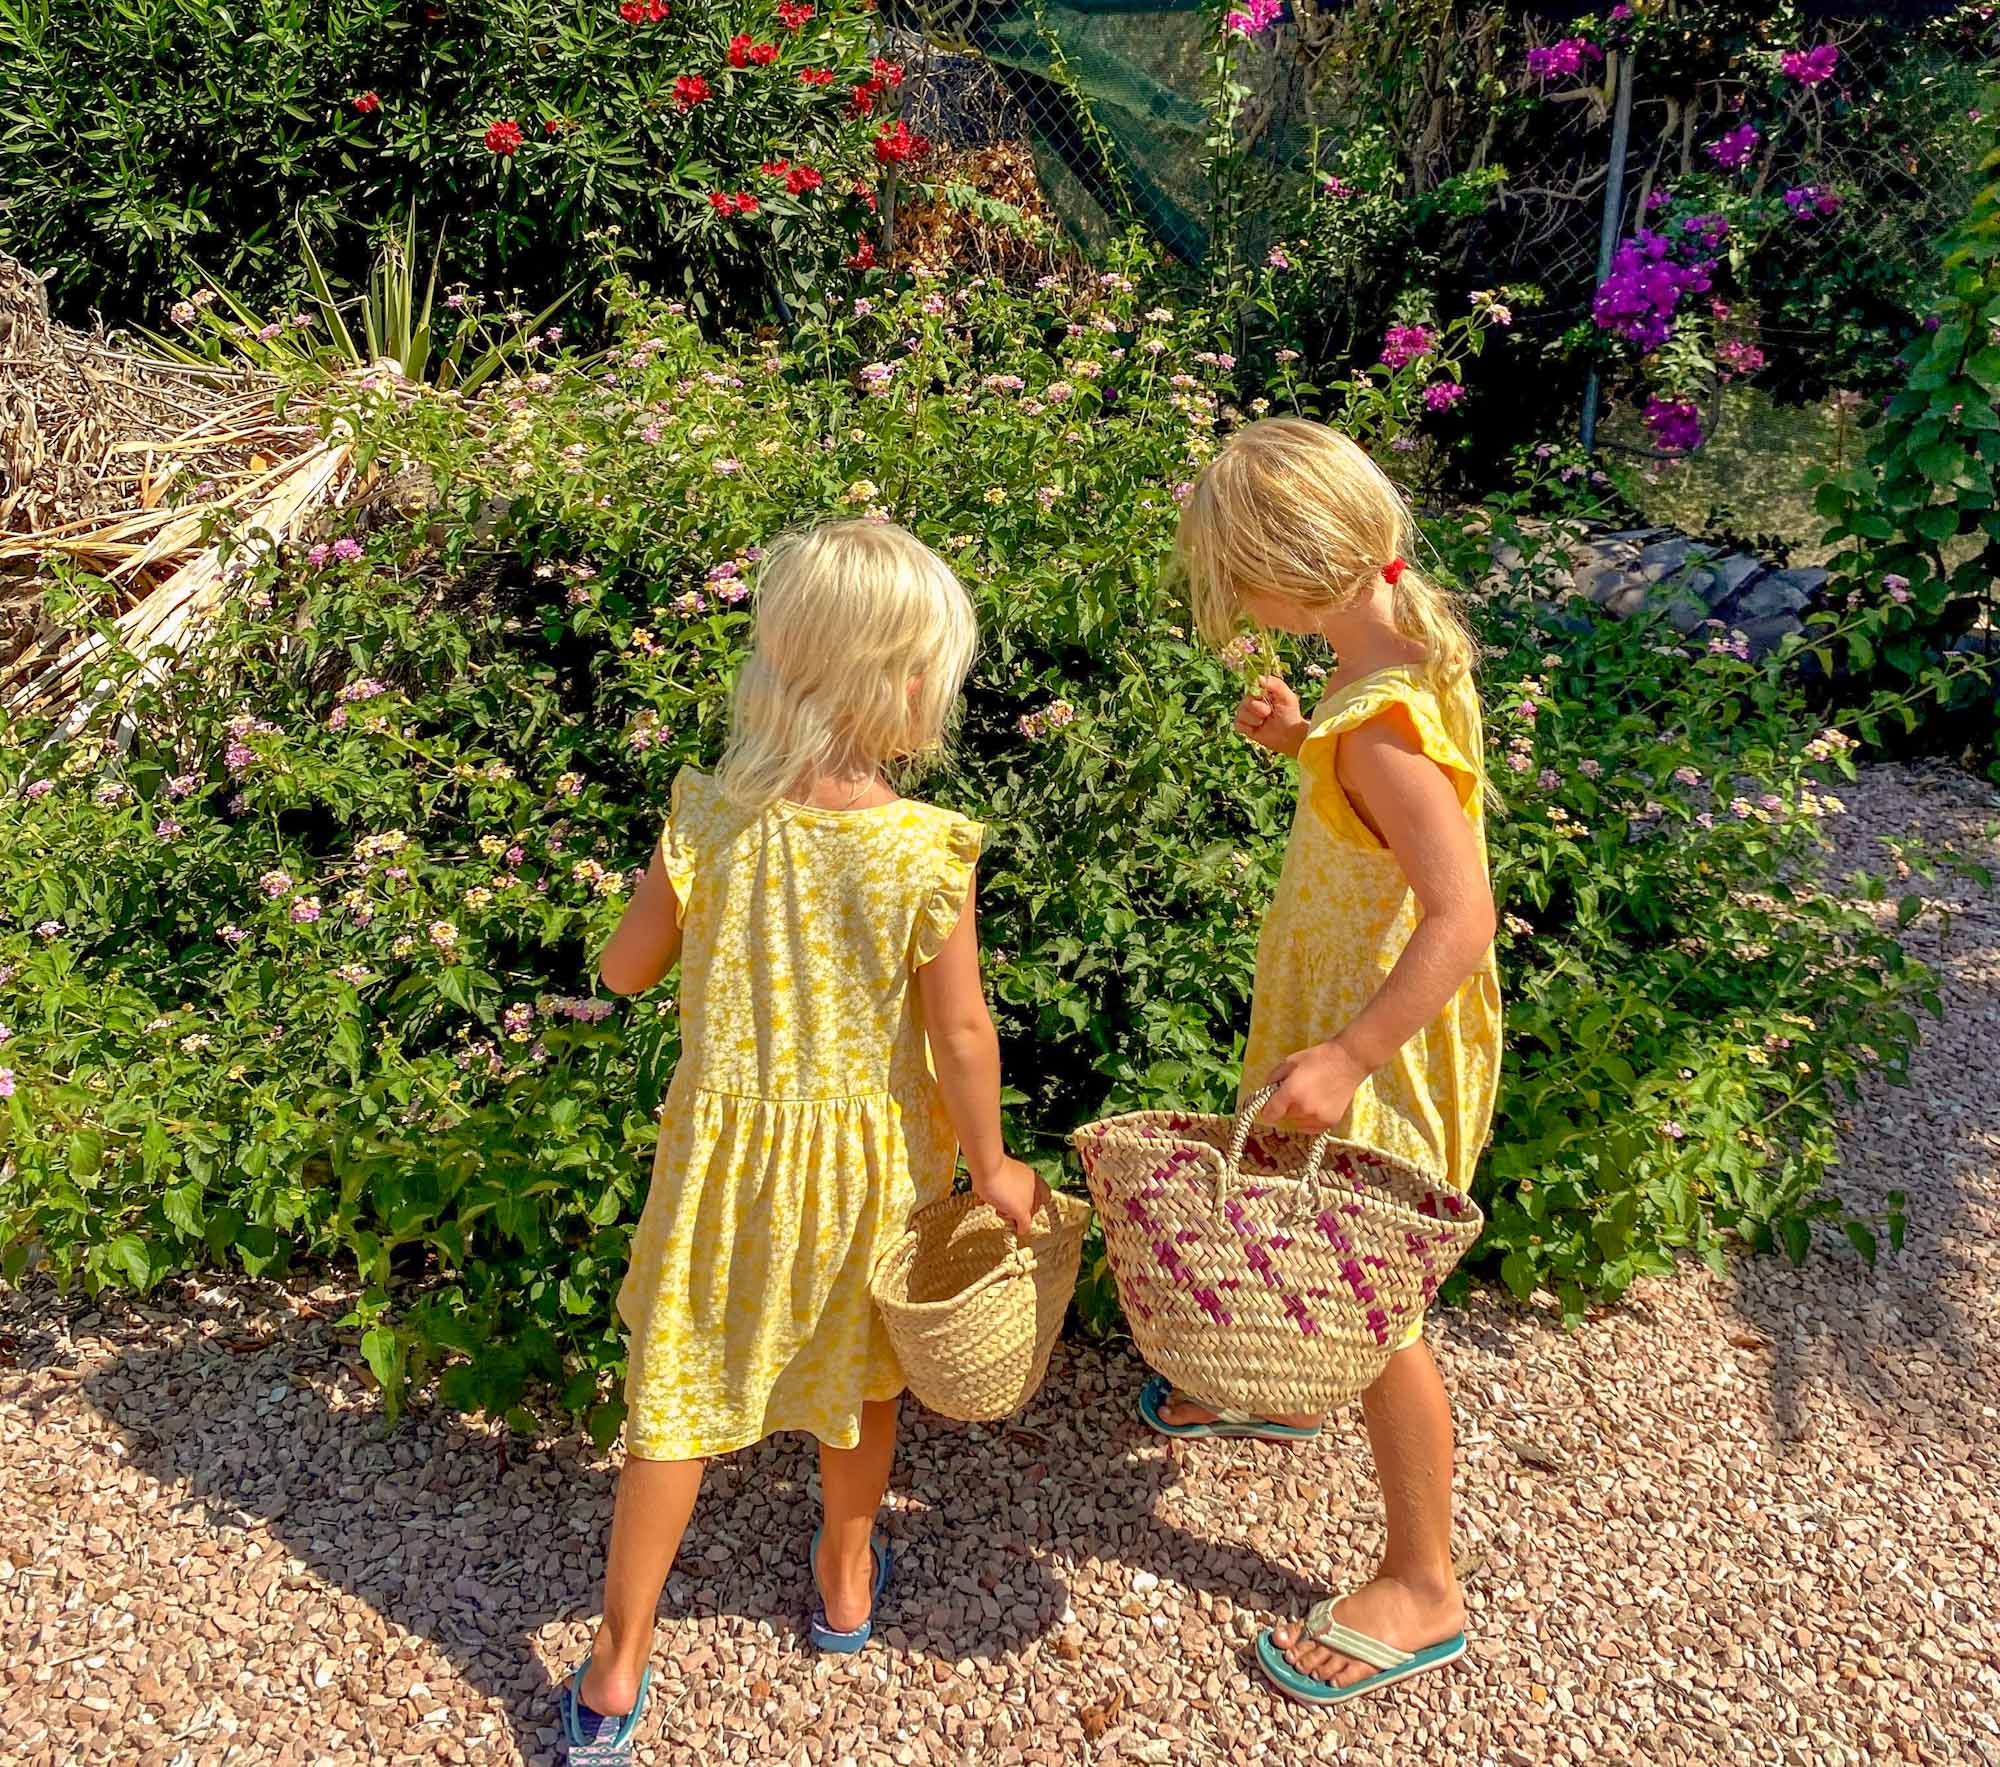 2 girls collecting flowers in the garden into wicker baskets